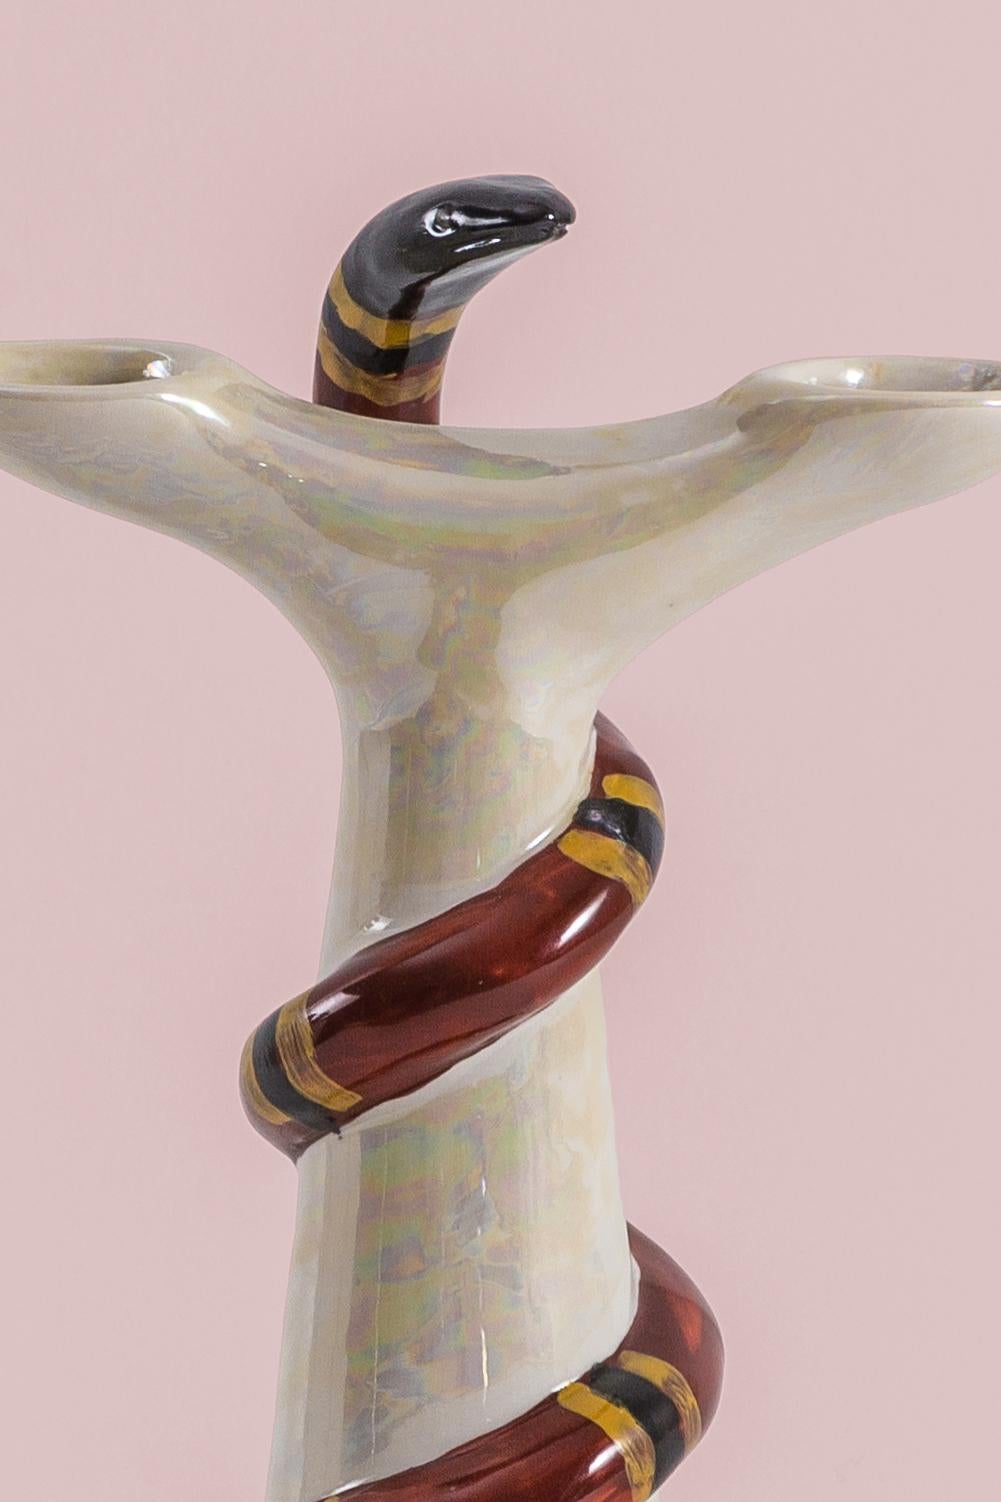 This Italian porcelain sculpture is part of Grand Tour by Vito Nesta. Made in Capodimonte porcelain with a glossy and iridescent finish. This double candle holder is embellished by a hand painted snake.